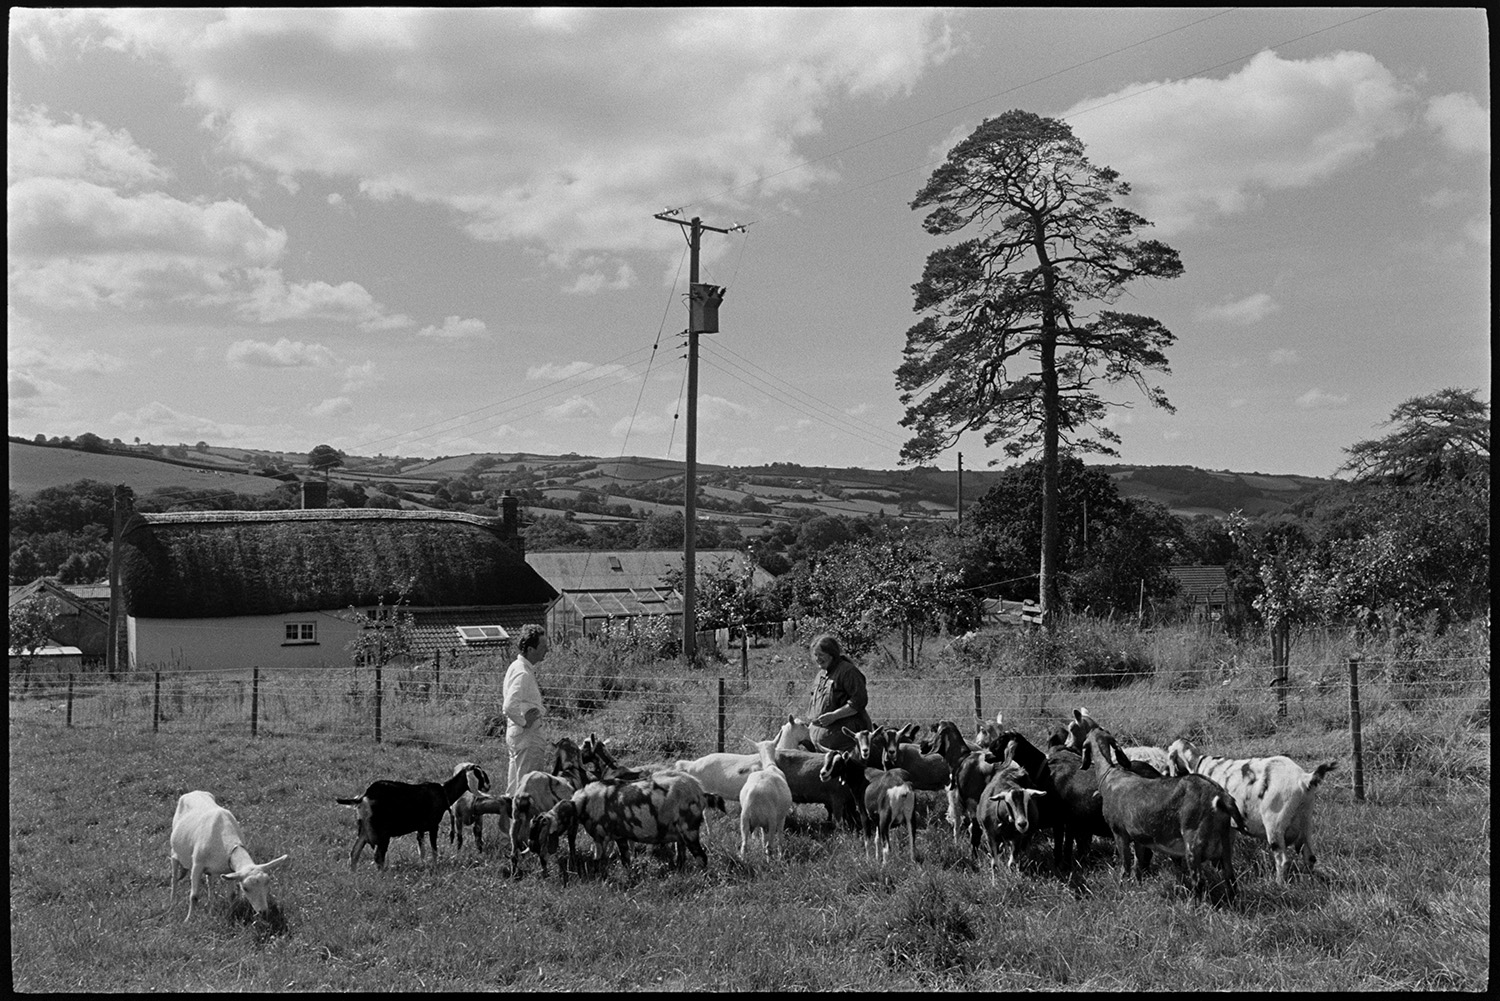 Flock of goats for cheese production. 
[Peter Charnley and Hillary Charnley checking a herd of goats in a field at Park Farm, Umberleigh. The farmhouse and other farm buildings can be seen in the background. The goat milk was used to make cheese.]